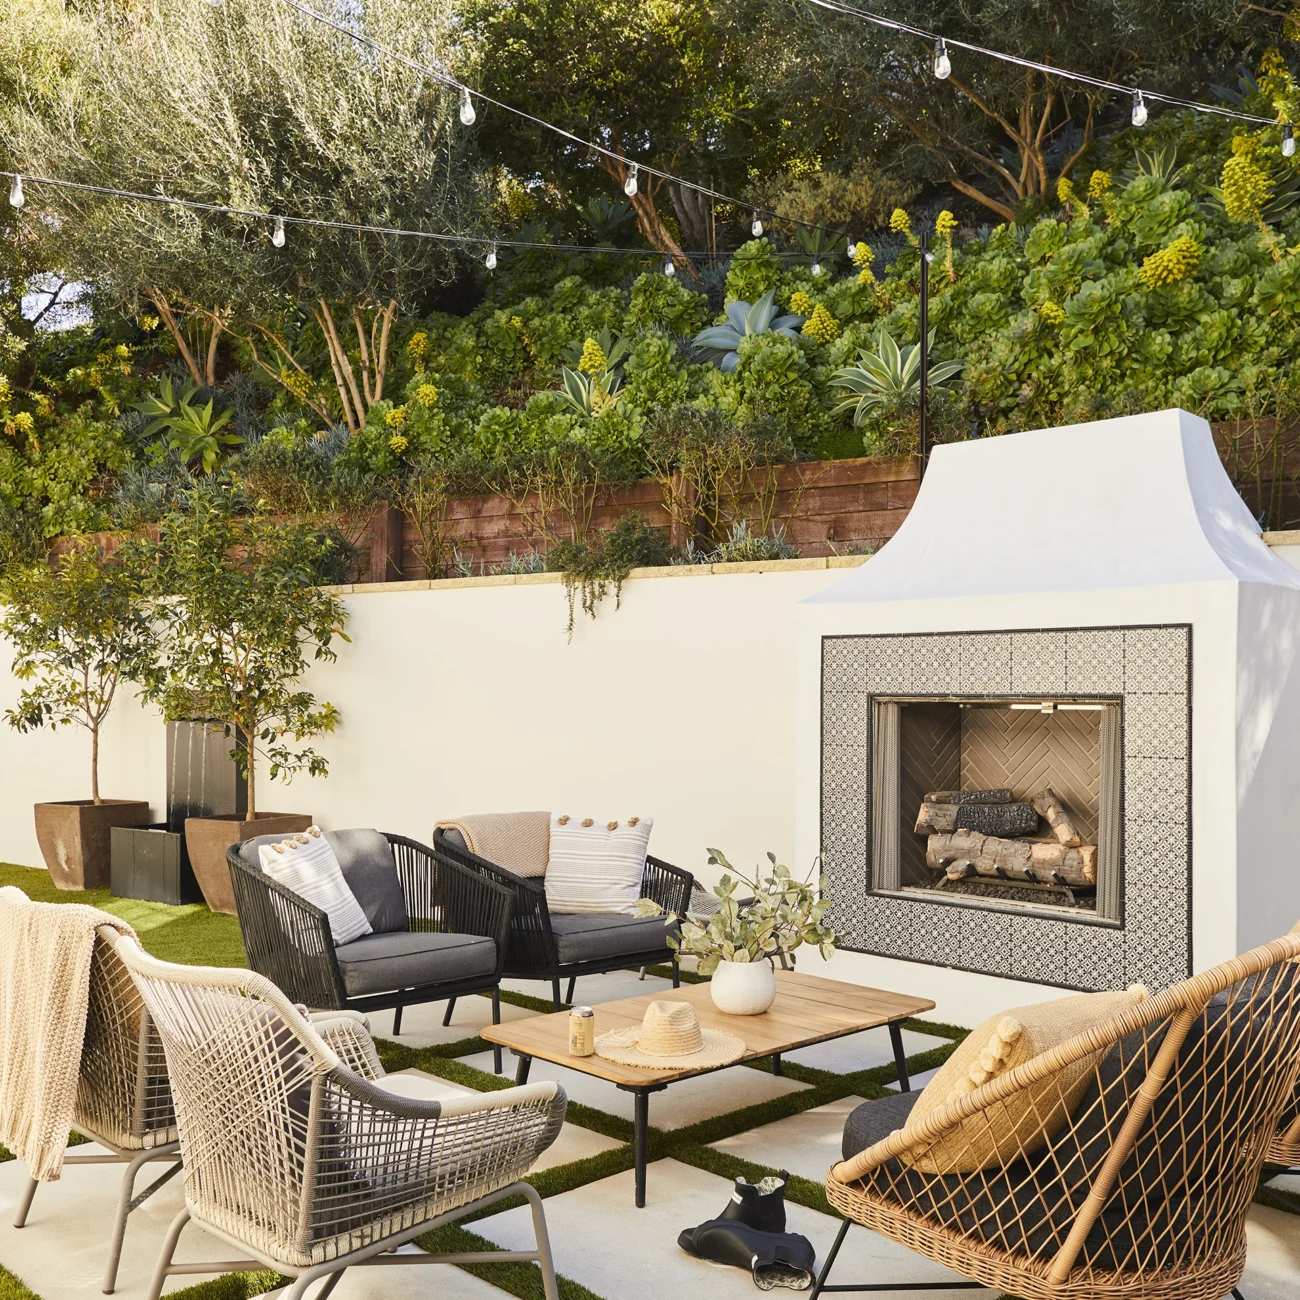 Christine Vroom Interiors | Via Almar | Costal patio with outdoor fireplace and grass grown in between concrete pads